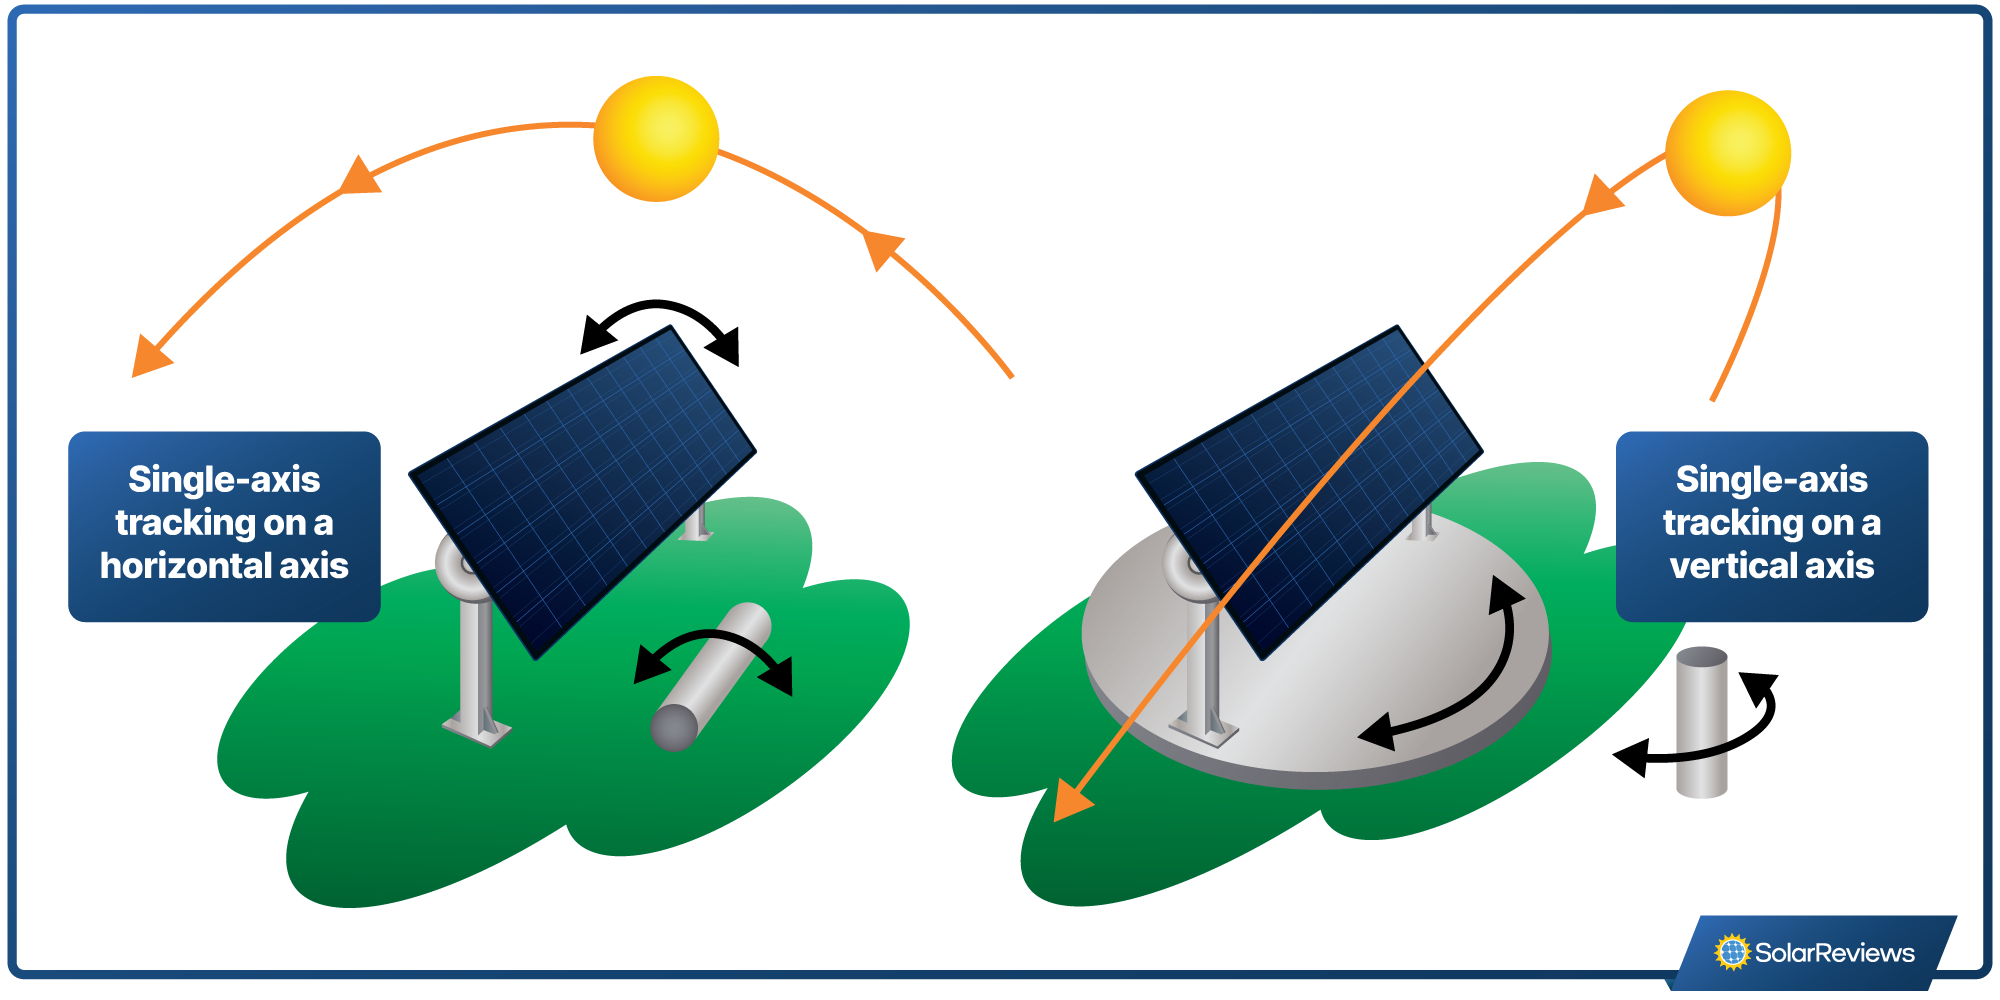 Graphic of a horizontal single-axis solar tracker and a vertical single-axis solar tracker side by side.